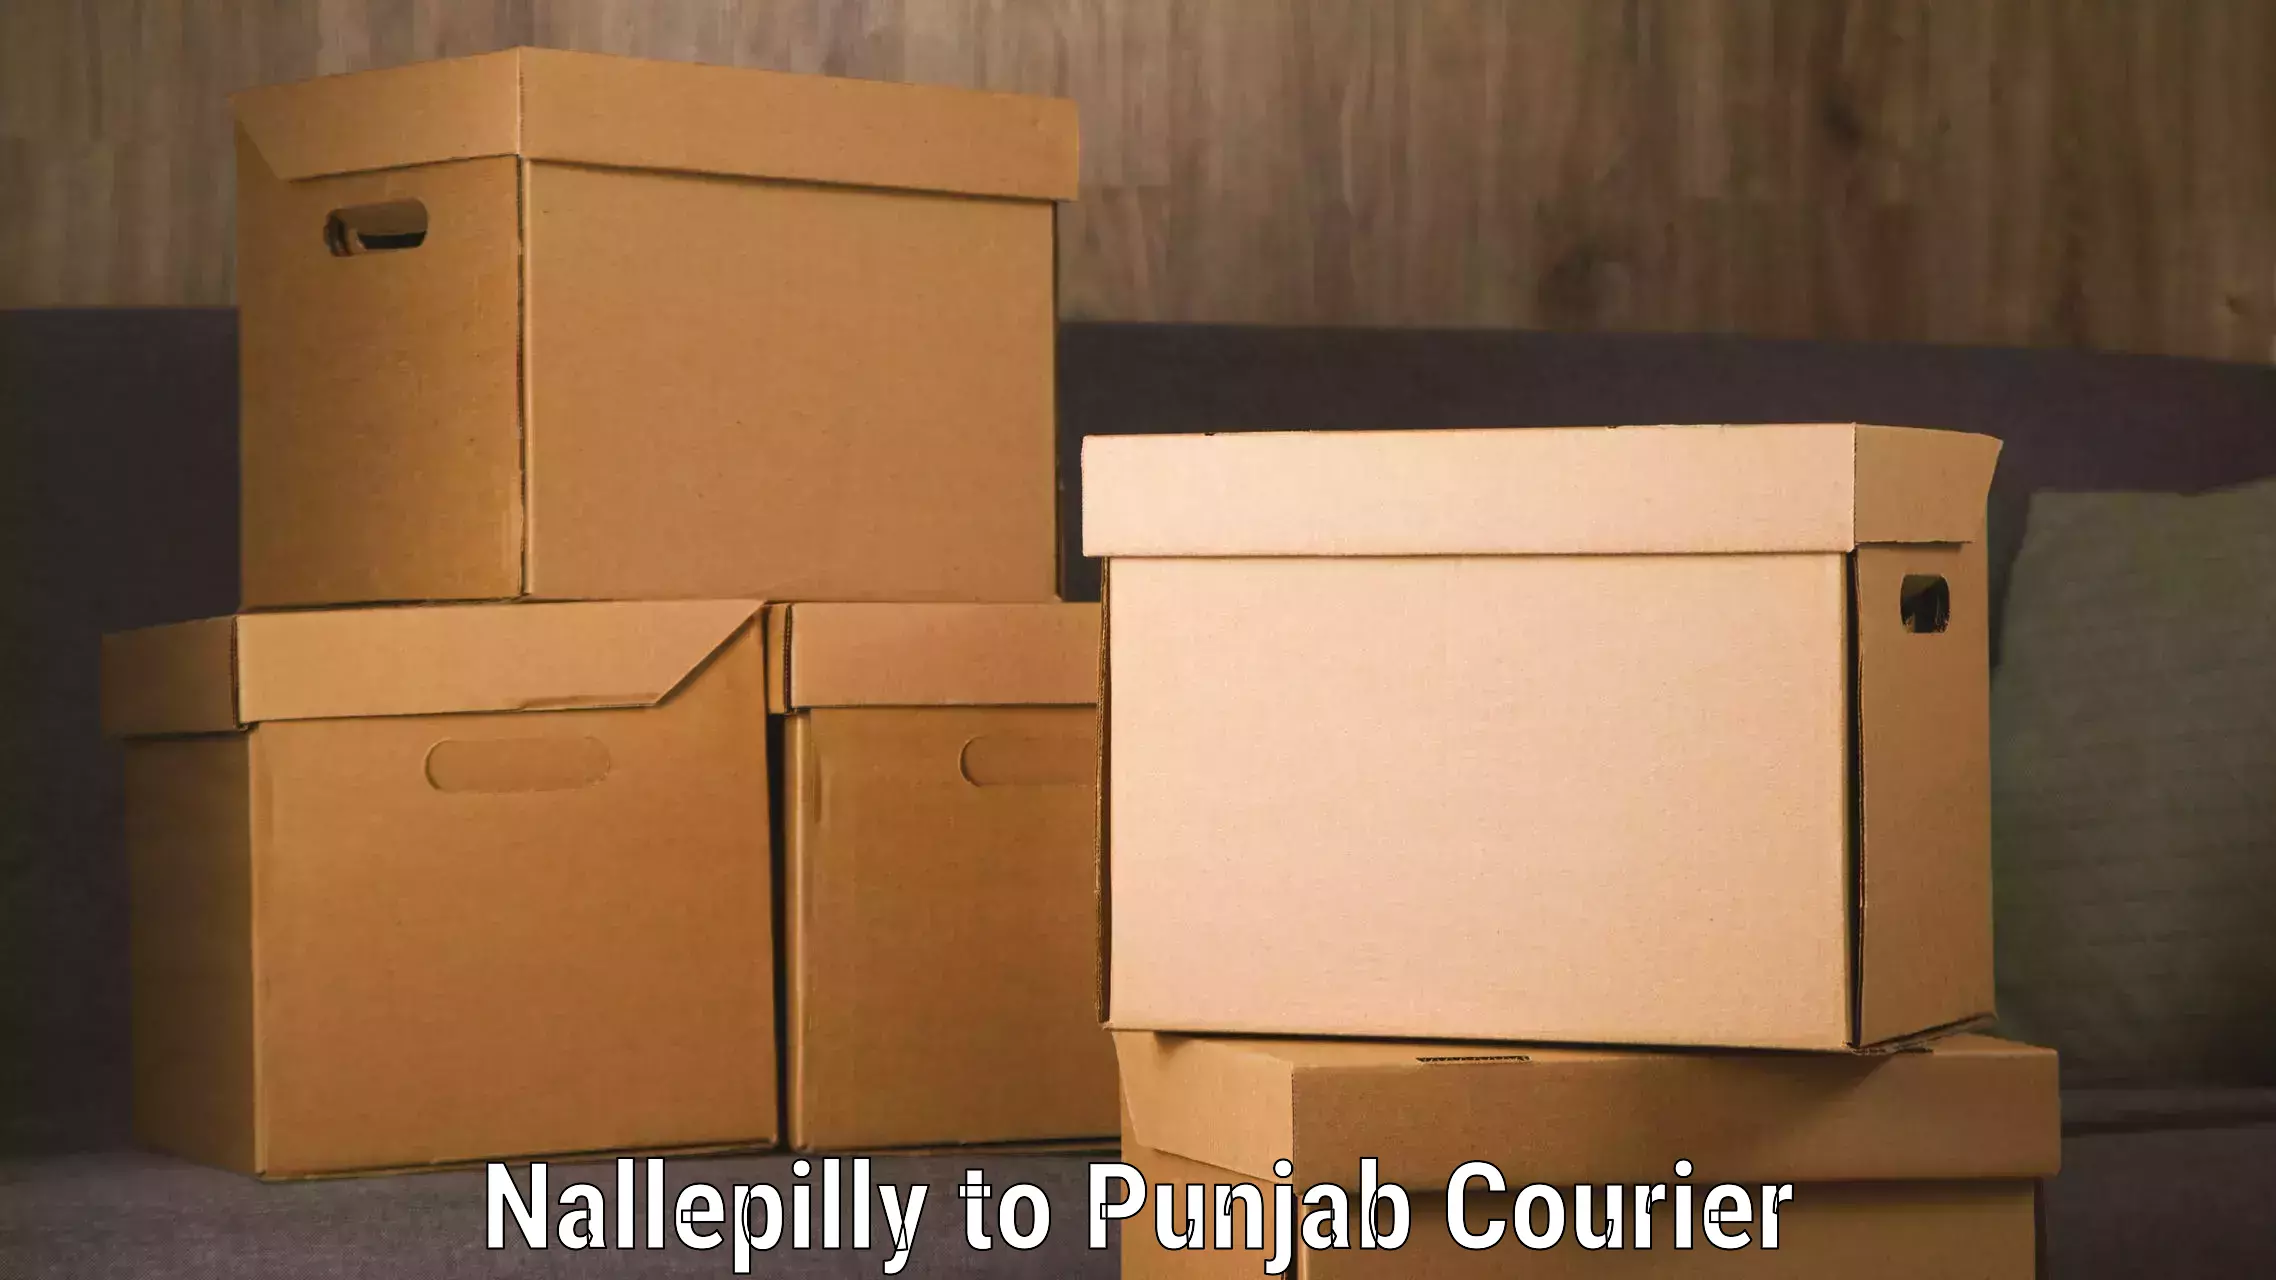 End-to-end delivery Nallepilly to Punjab